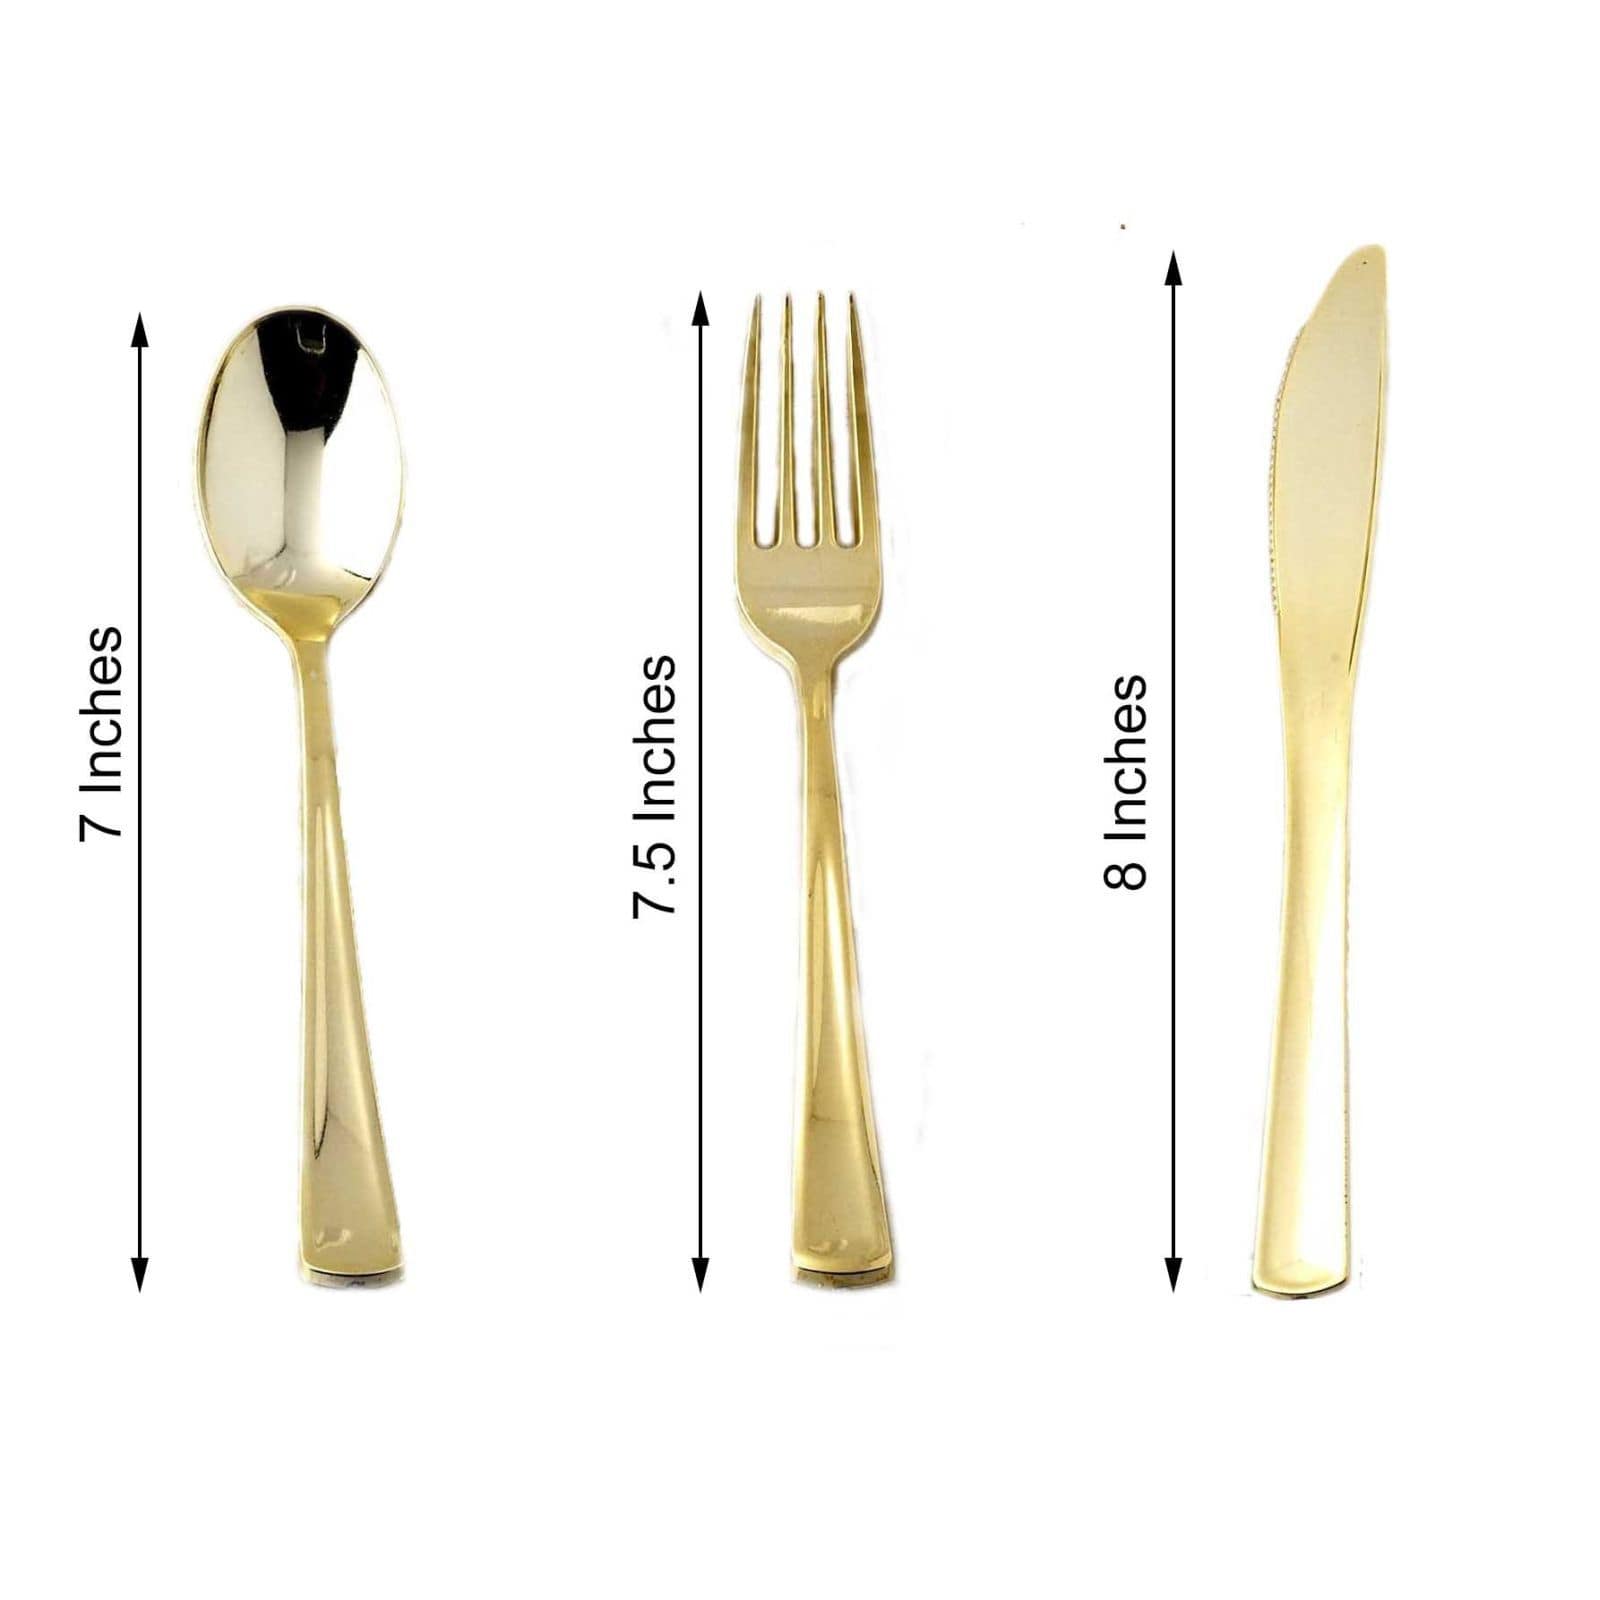 24 pcs Gold Metallic Set Disposable Plastic Party Spoons Forks and Knives